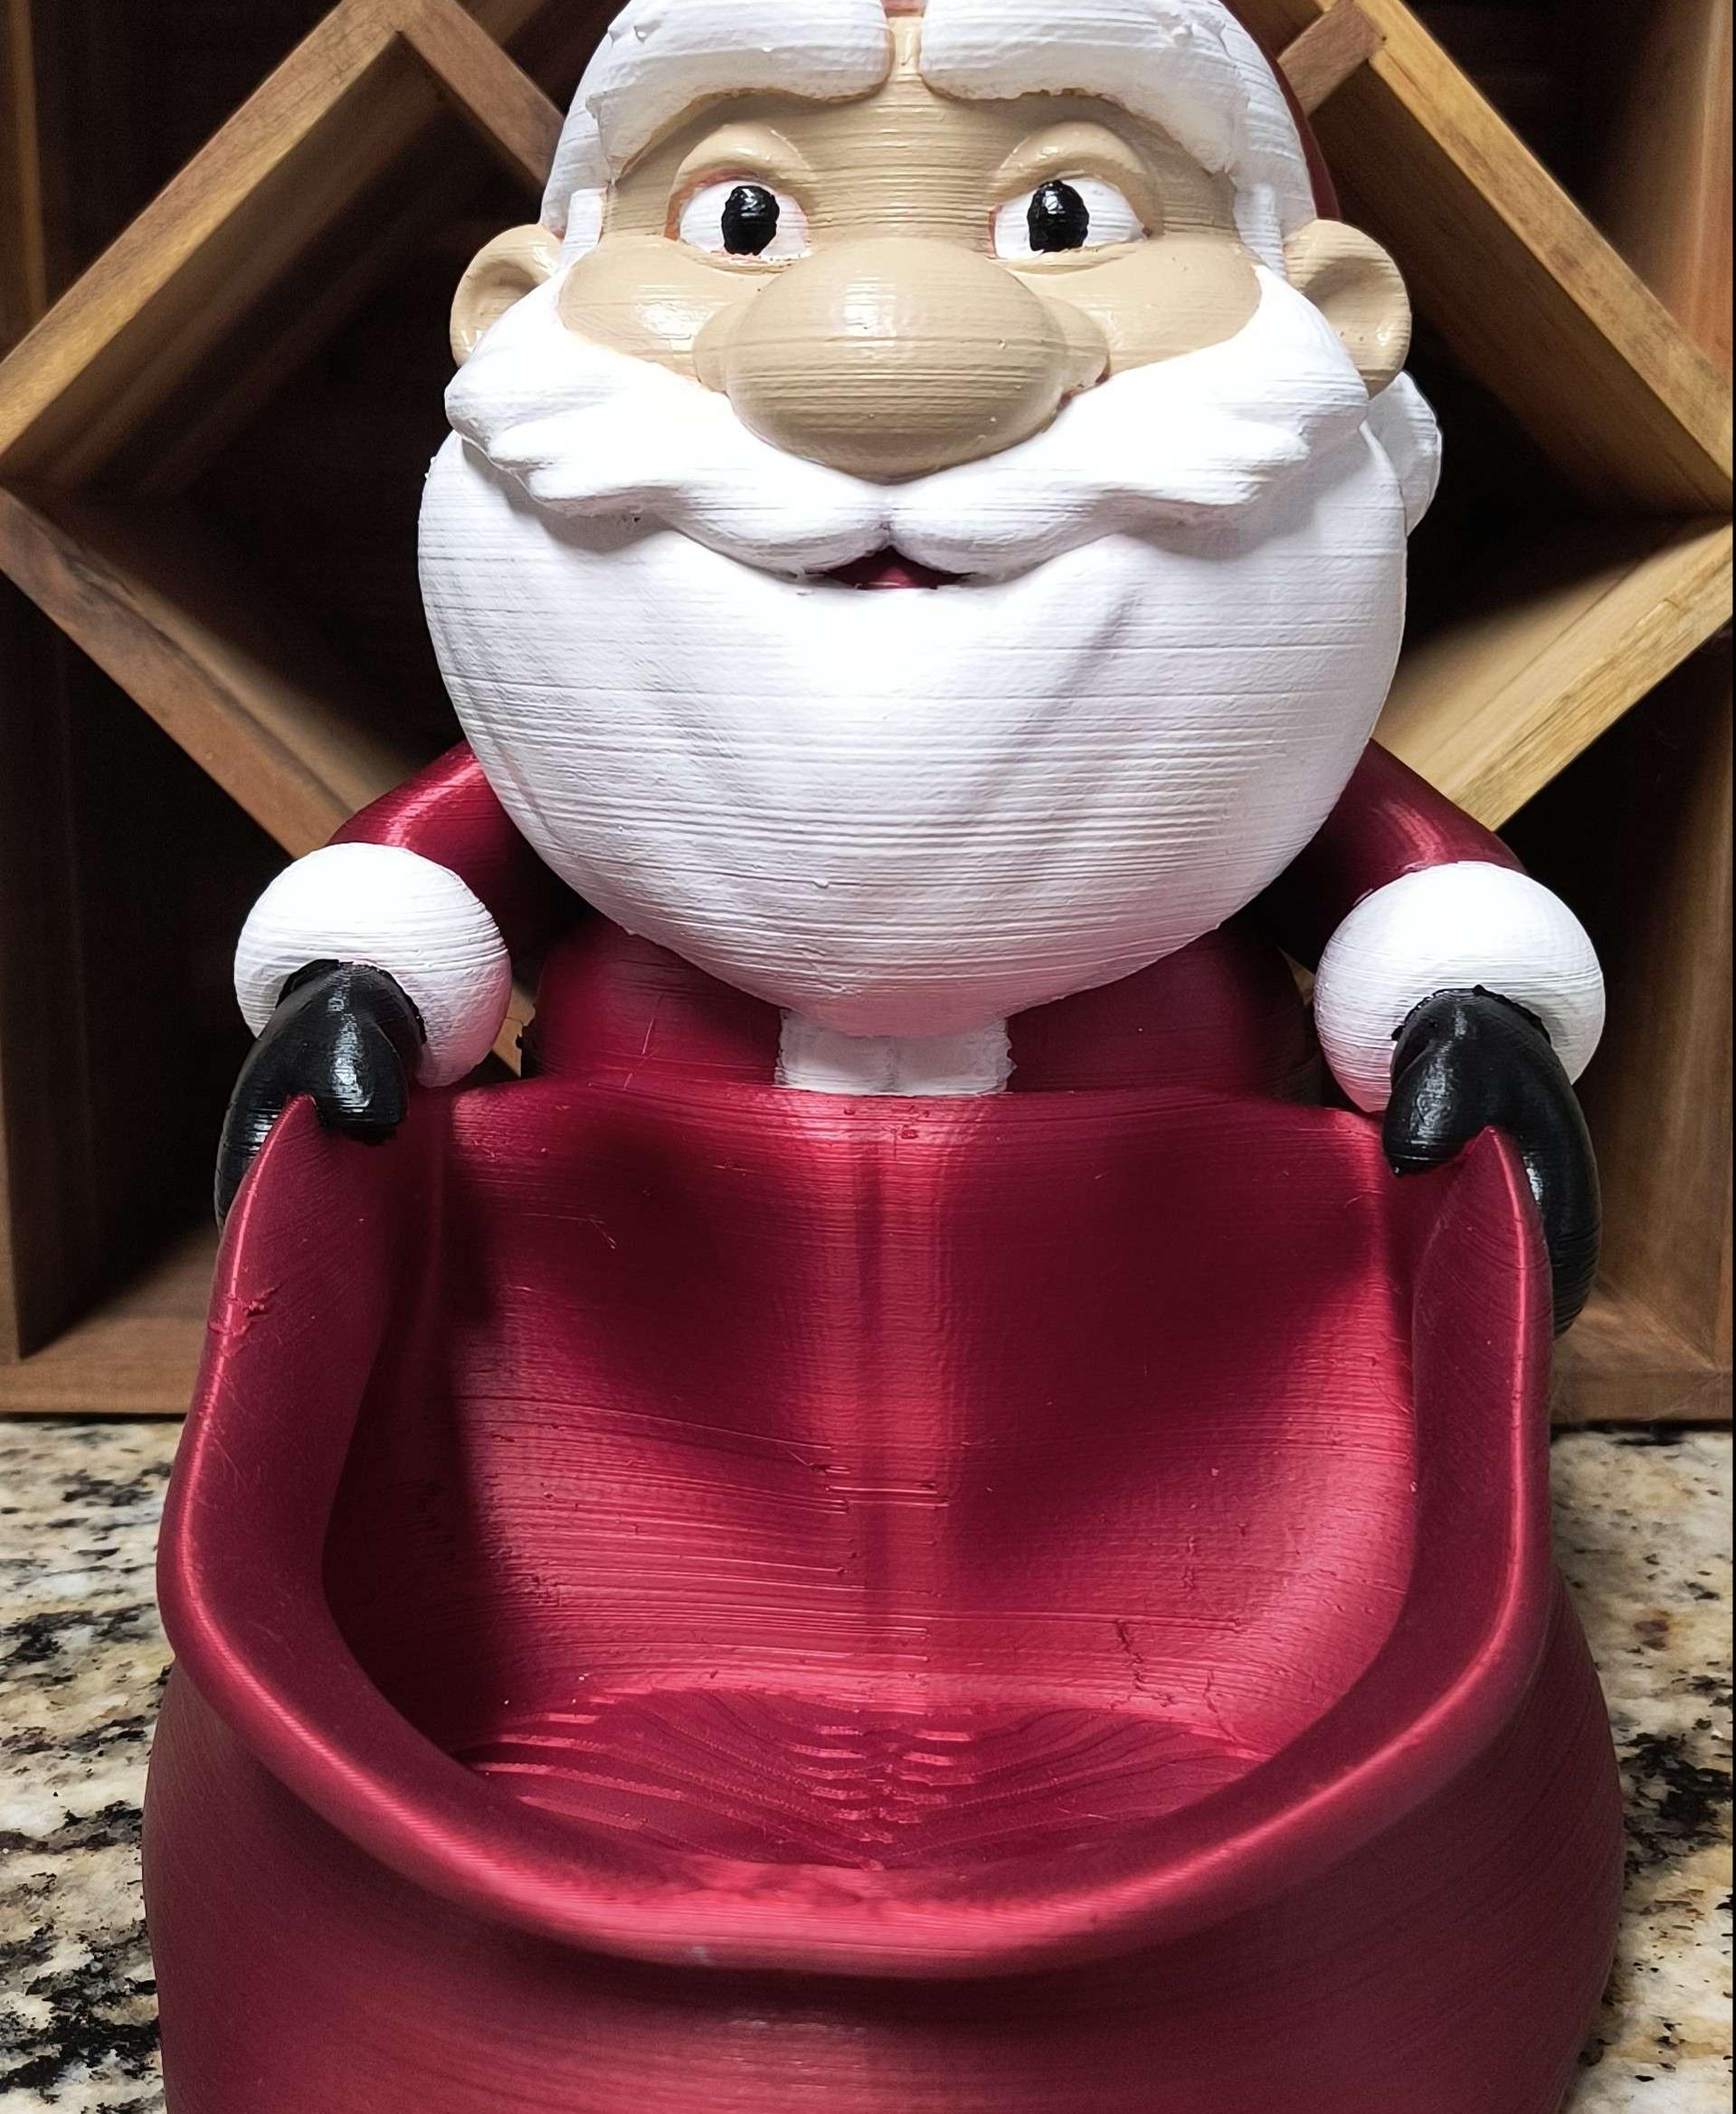 Santa Candy Bag Decoration  - Can't wait to take him to work and fill him up with candies for everyone. He is printed in Polymaker Santa's velvet red and then painted.  - 3d model